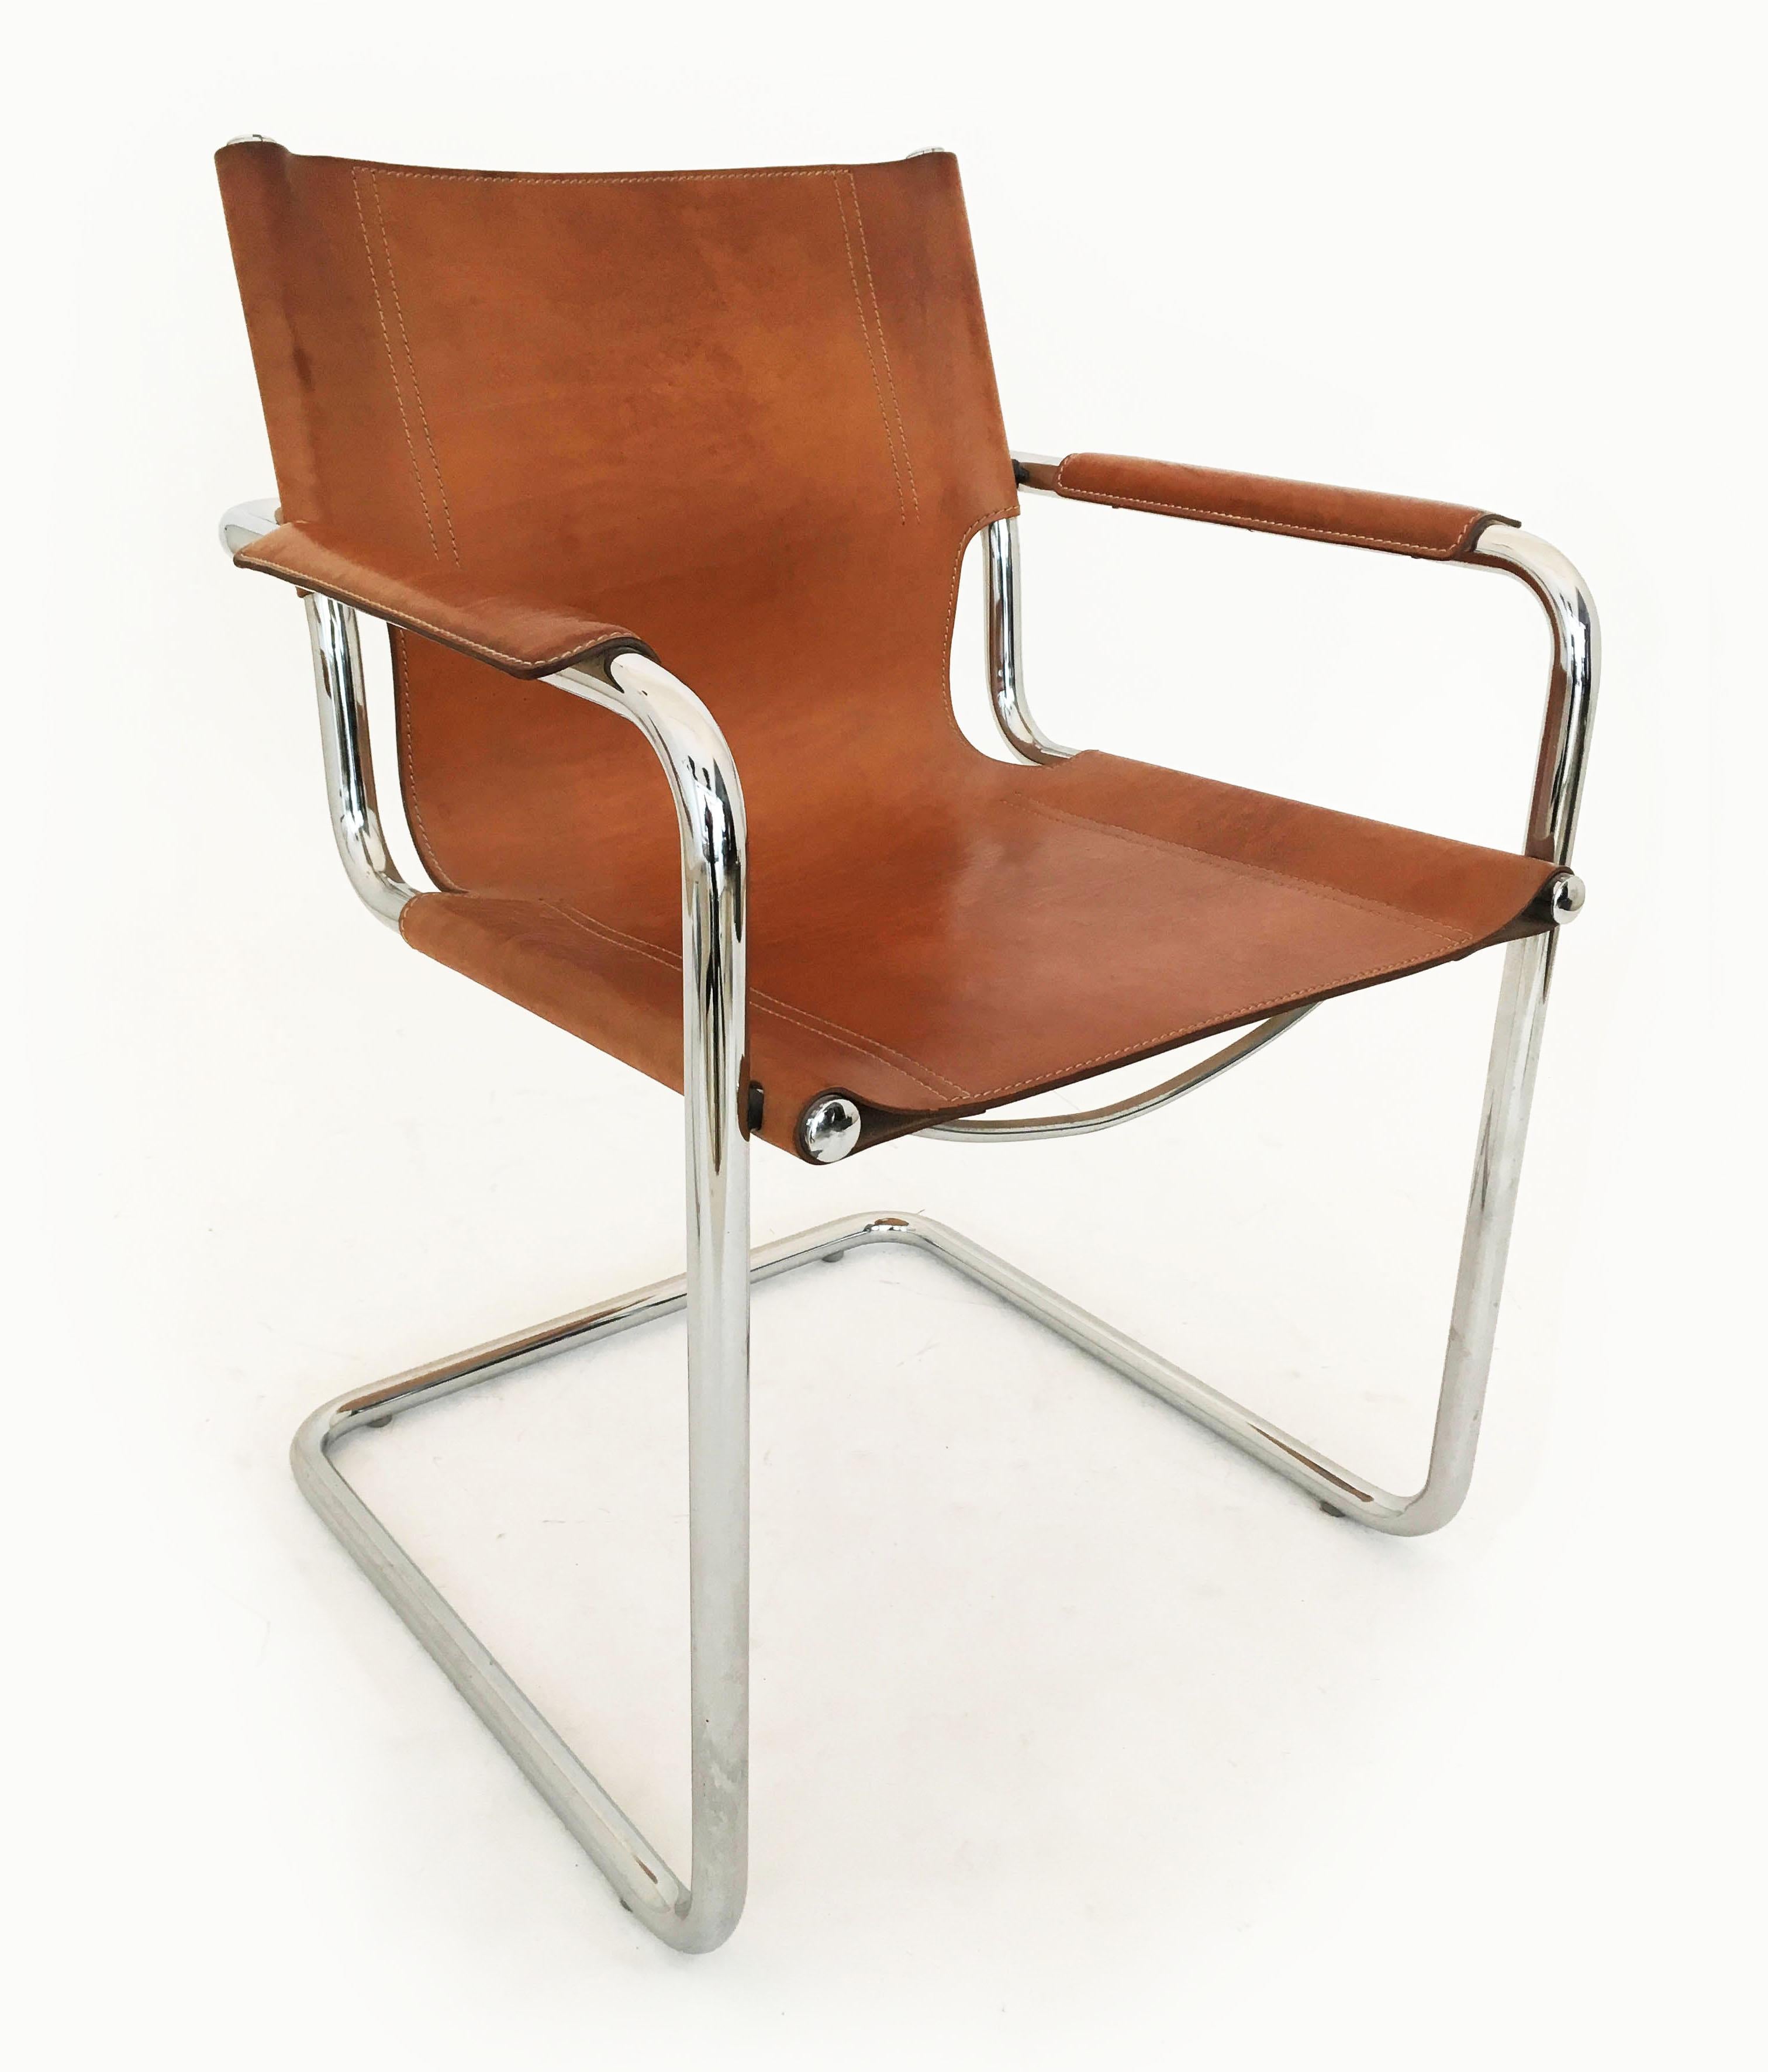 Late 20th Century Matteo Grassi Model 'Visitor' Chairs in Patinated Cognac Leather, Italy 1970s